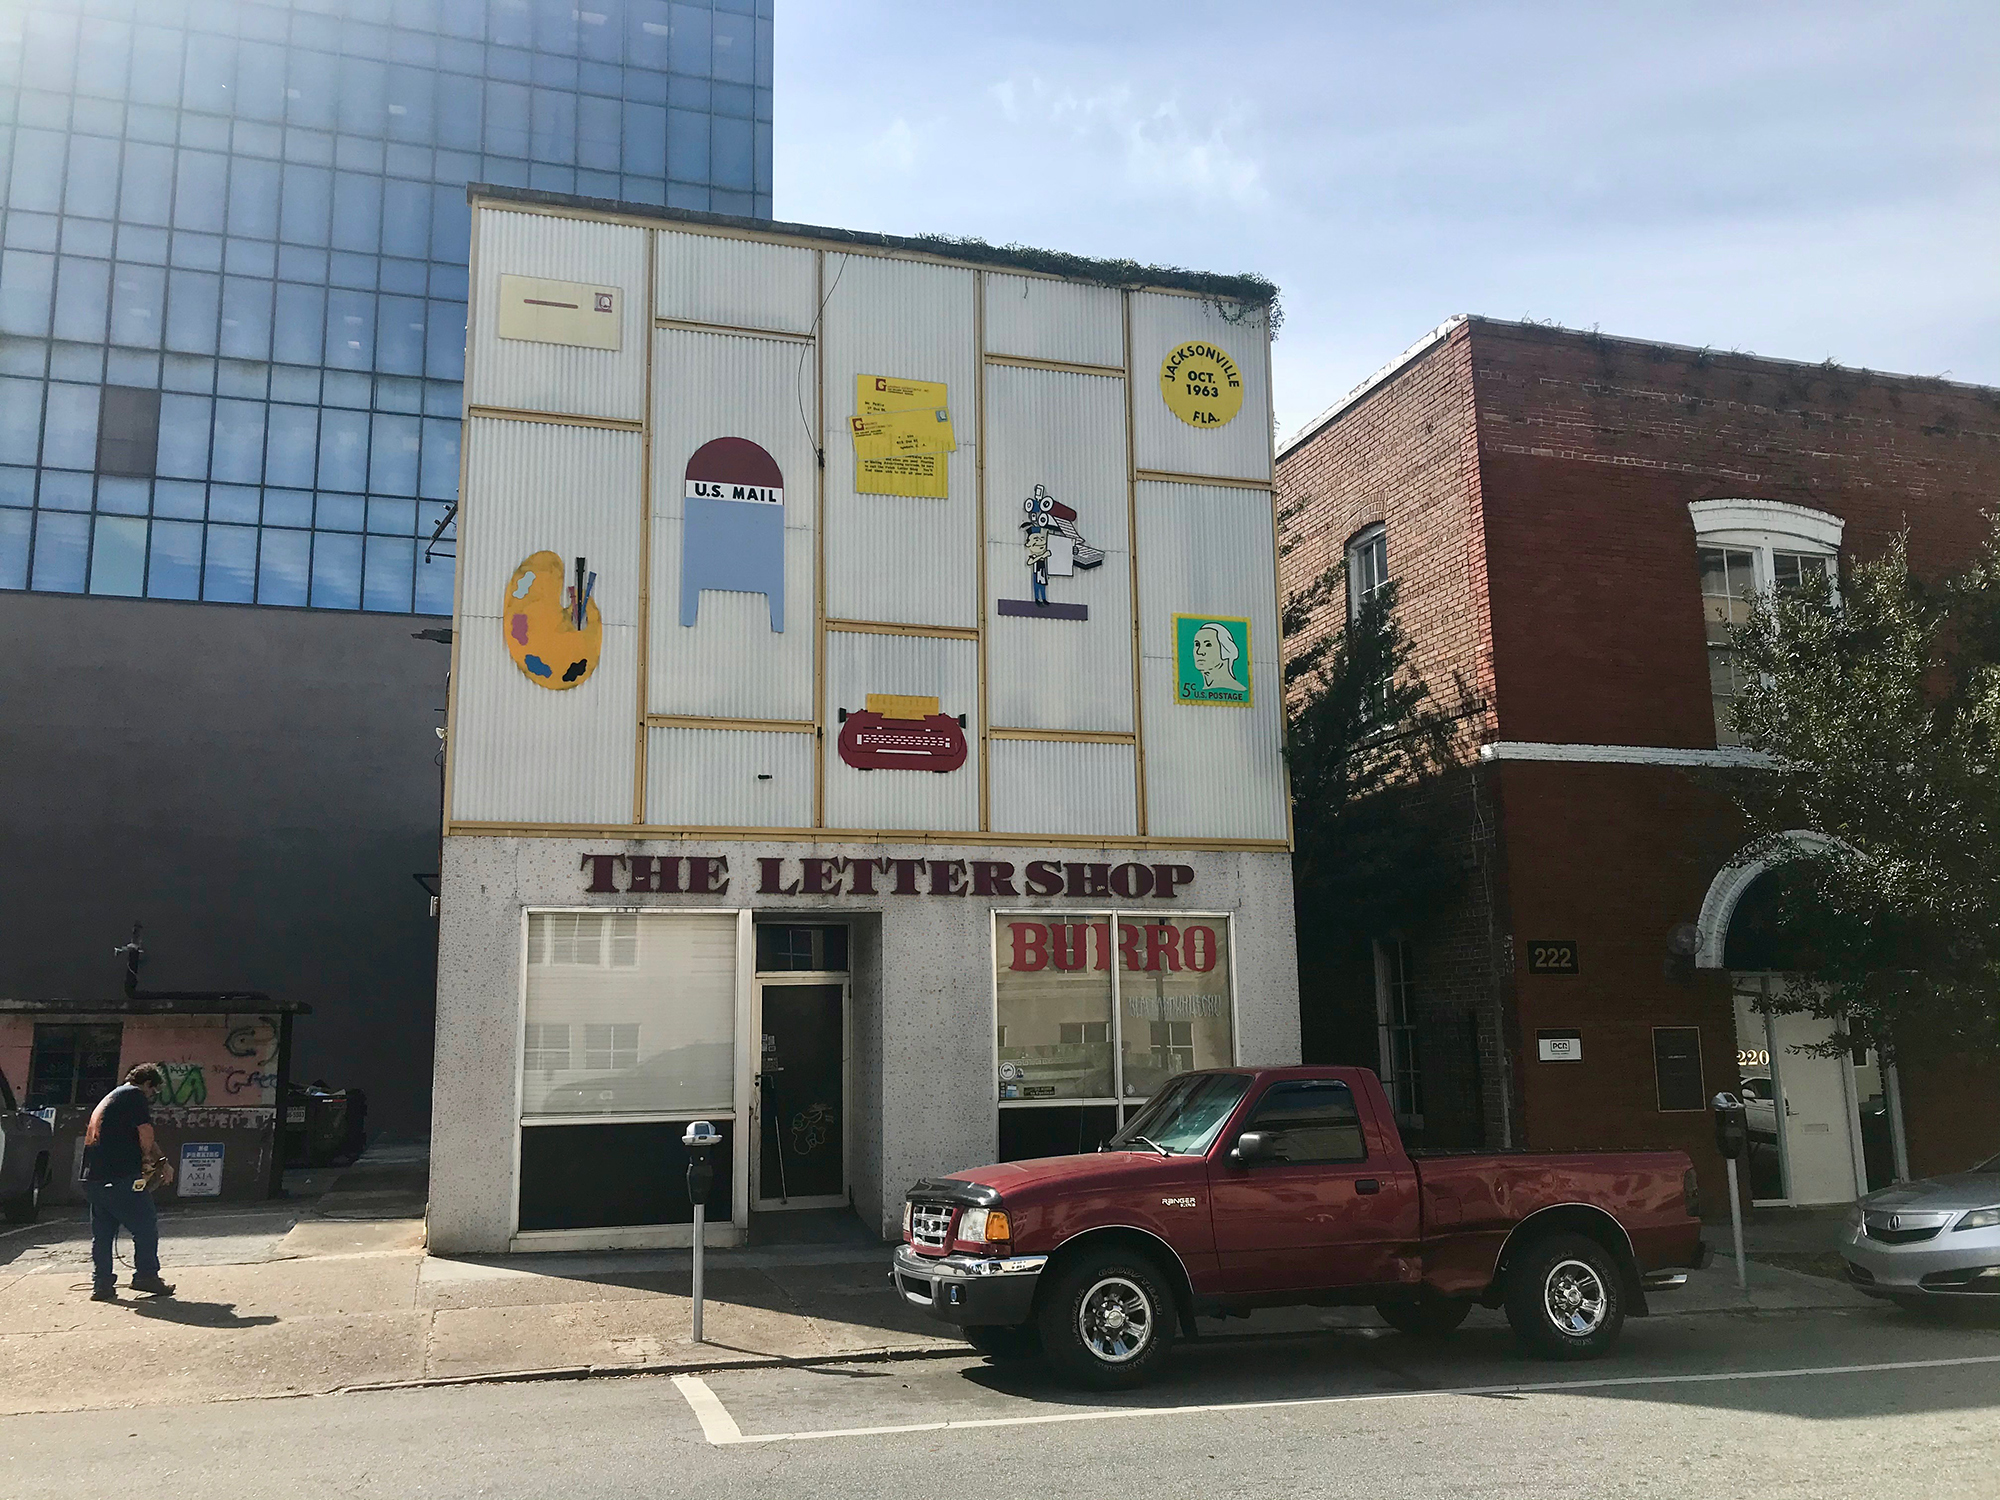 Ruby Beach Brewing Co.  is moving into The Letter Shop building at  228 E. Forsyth St.